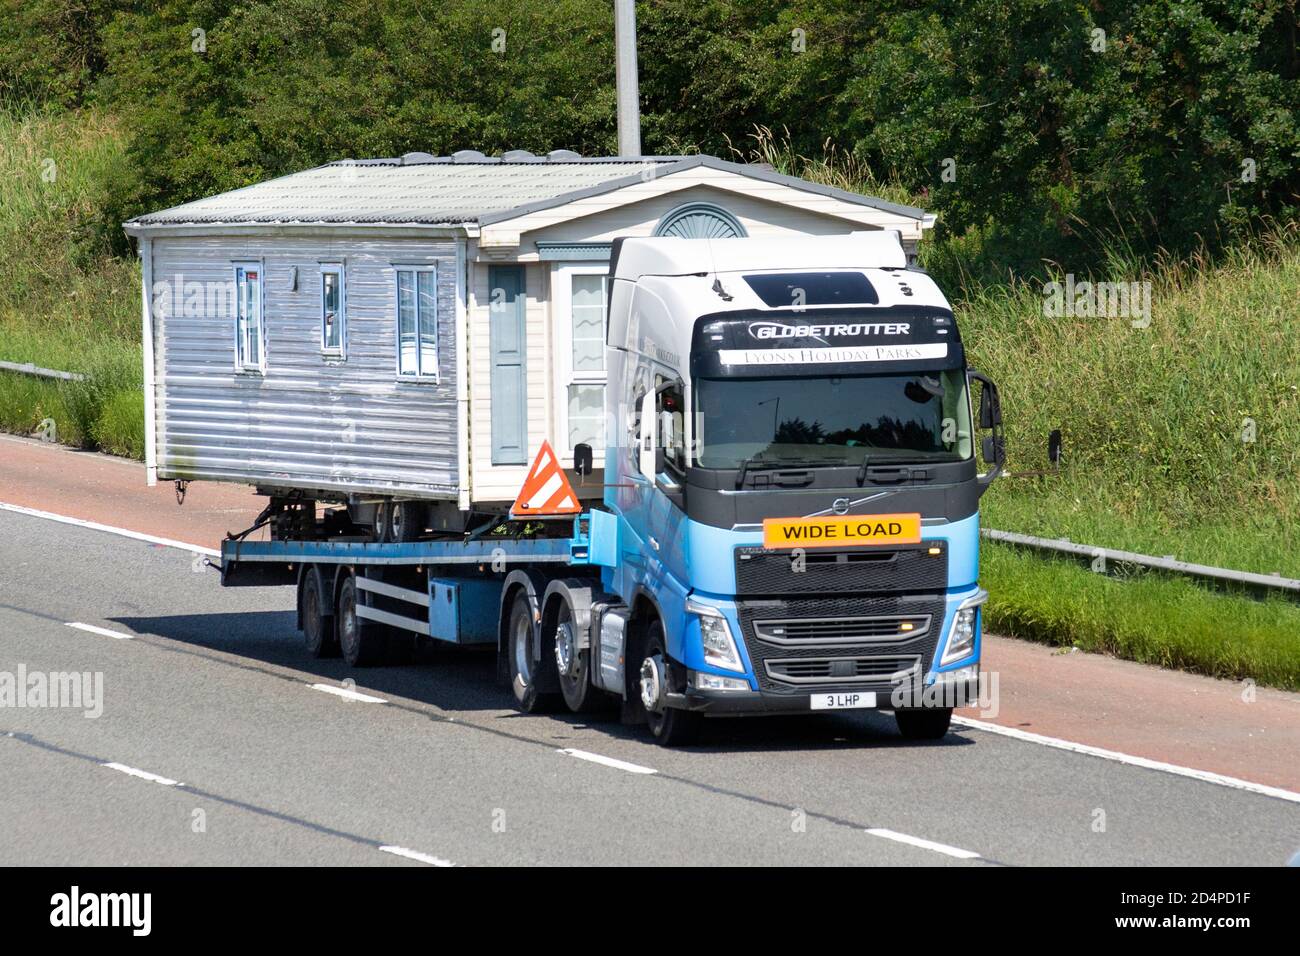 Lyons Holiday Parks caravan Sales & transport; Haulage delivery trucks, lorry, transportation, wide-load truck, cargo carrier, long-distance heavy-duty Volvo trucks, Volvo  vehicle, European commercial transport industry HGV, M6 at Manchester, UK Stock Photo